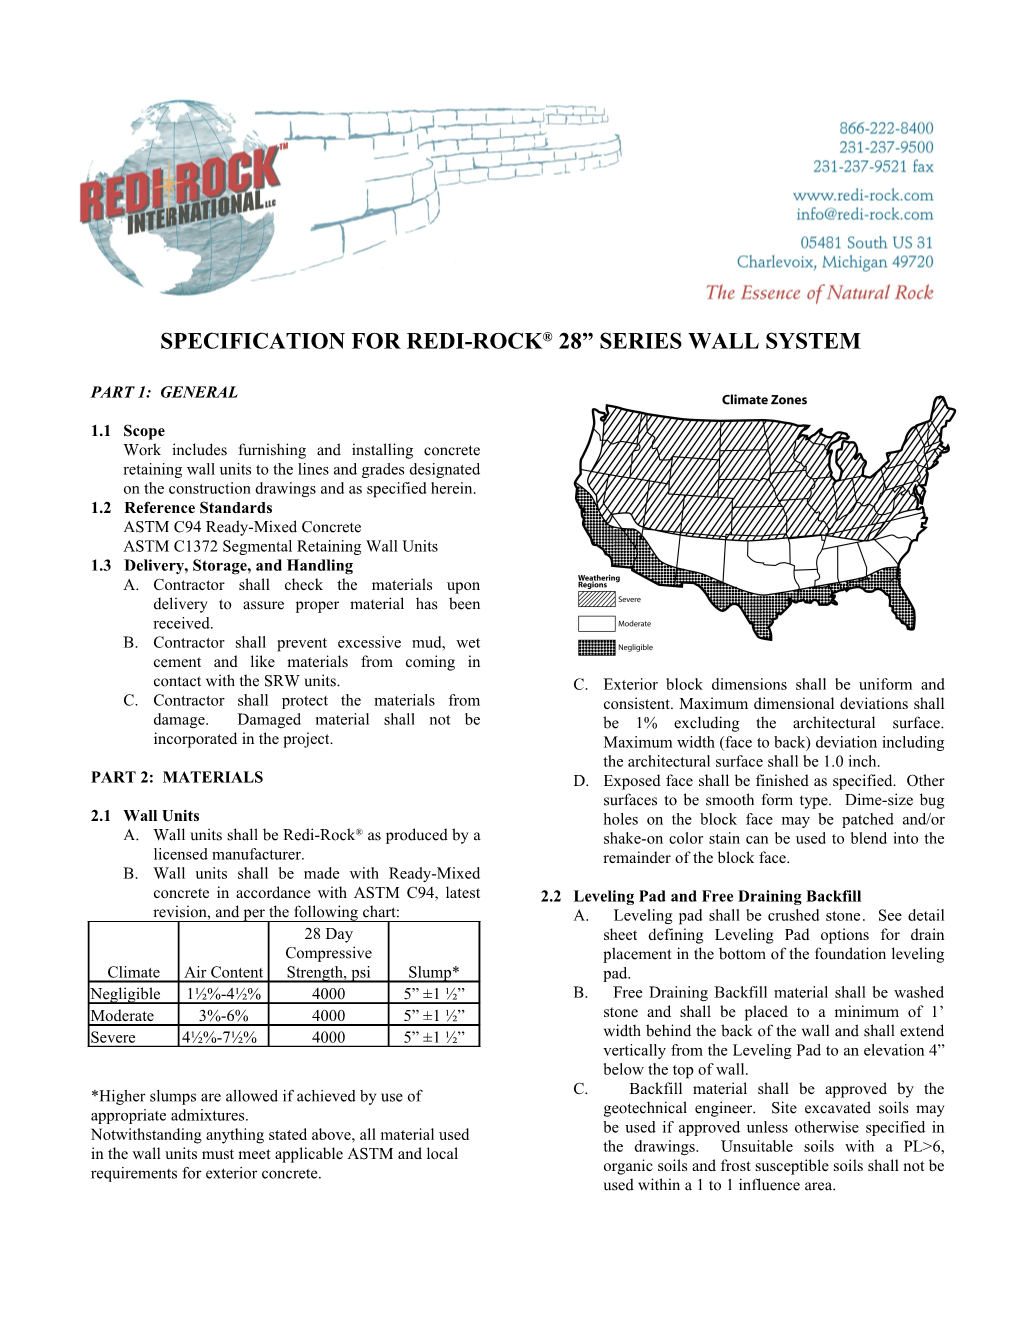 Specification for Redi-Rock 28 Series Wall System